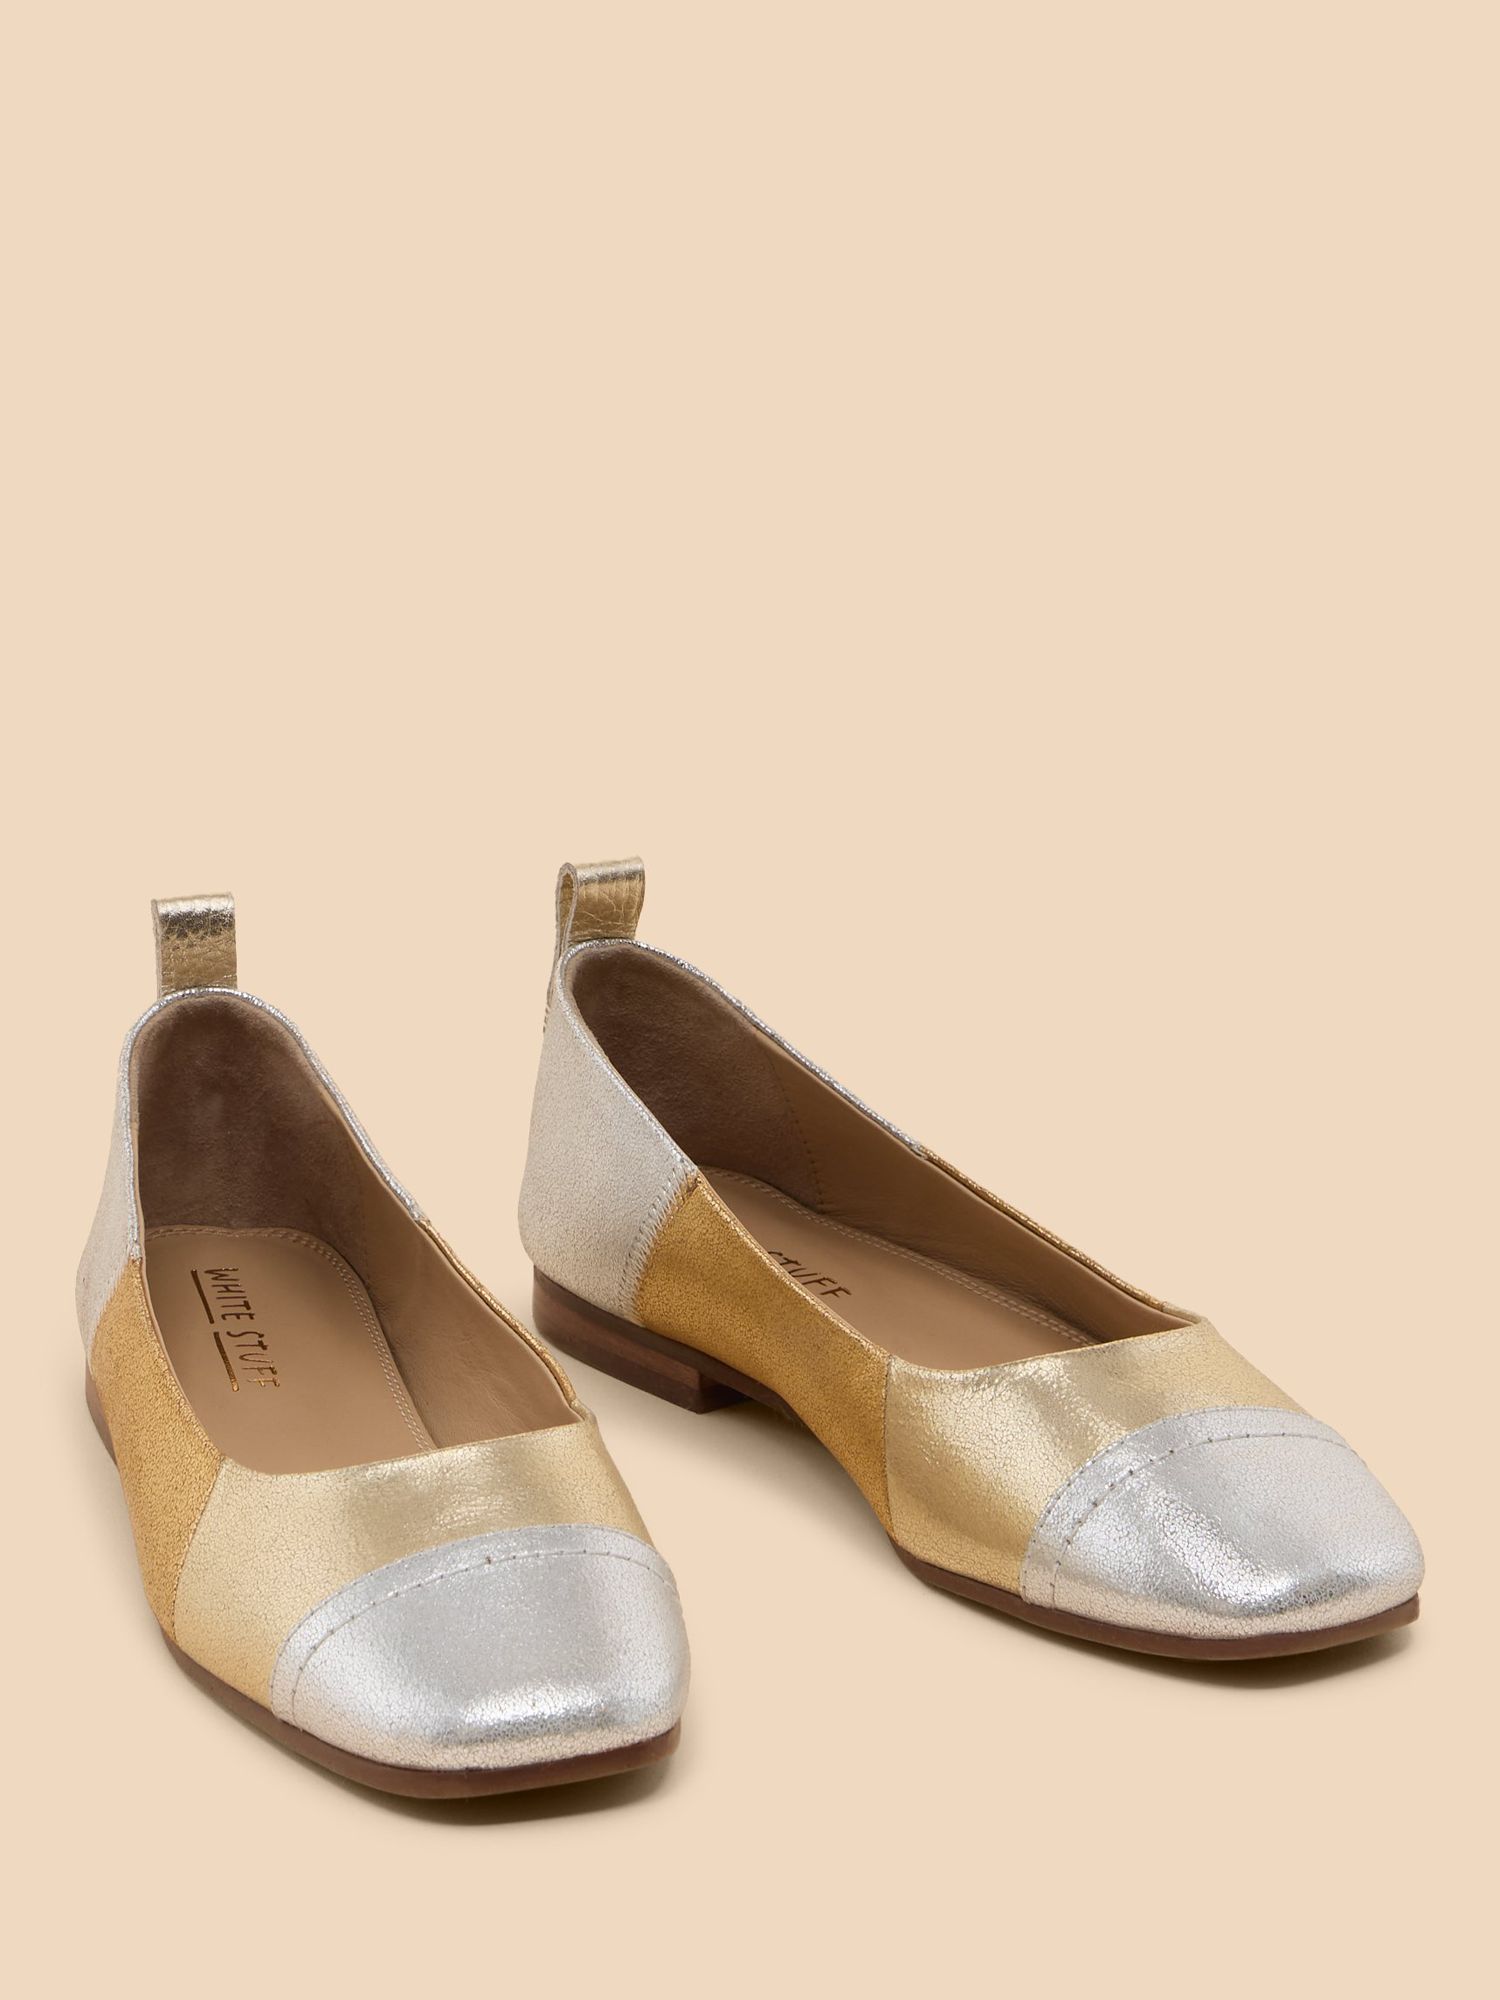 White Stuff Loral Leather Pumps, Gold/Silver, 3